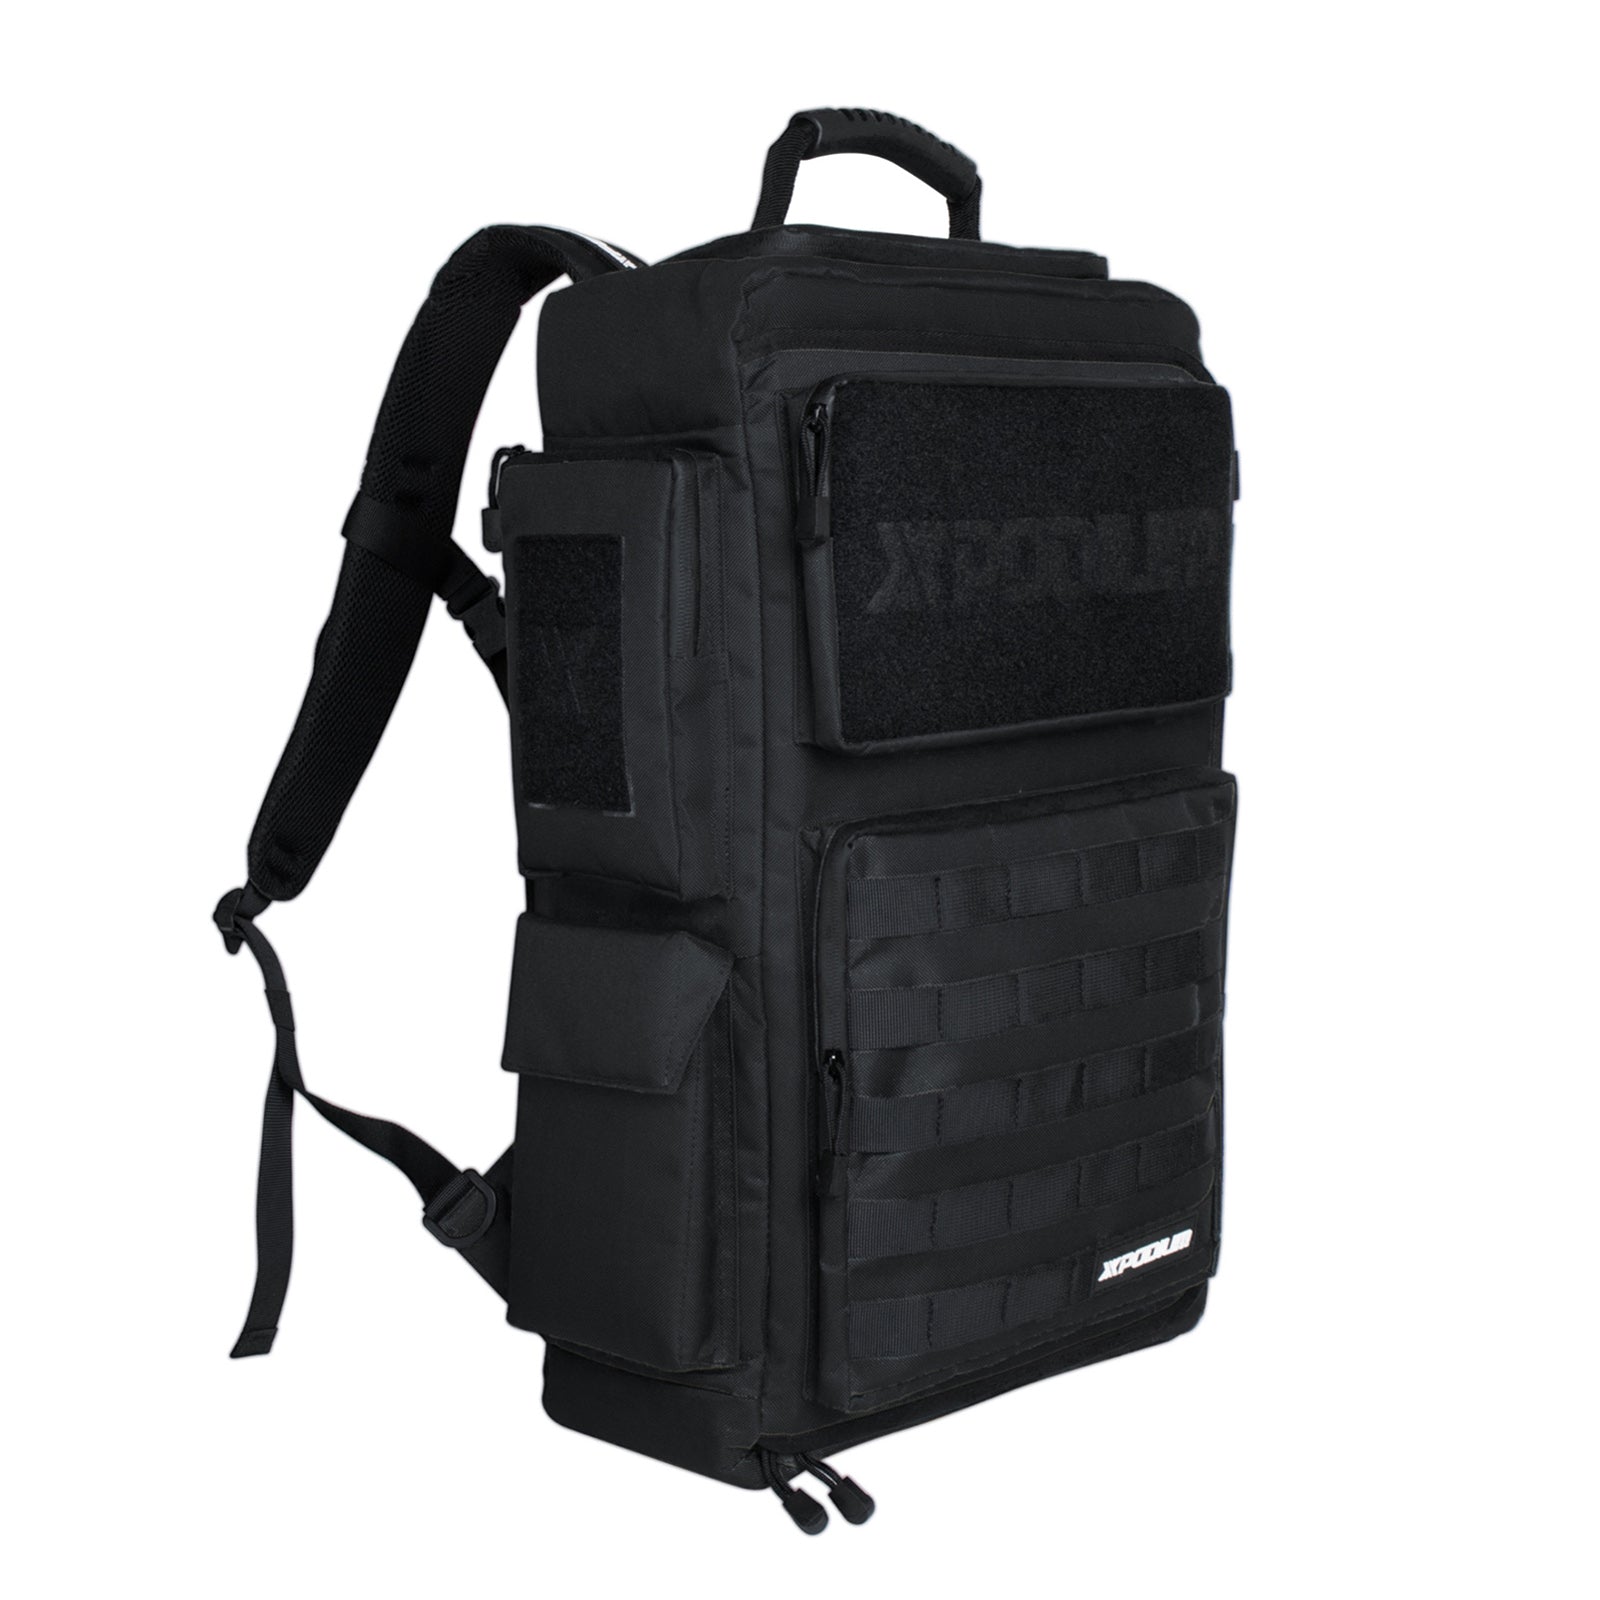 Gym Backpack for your sporting events -